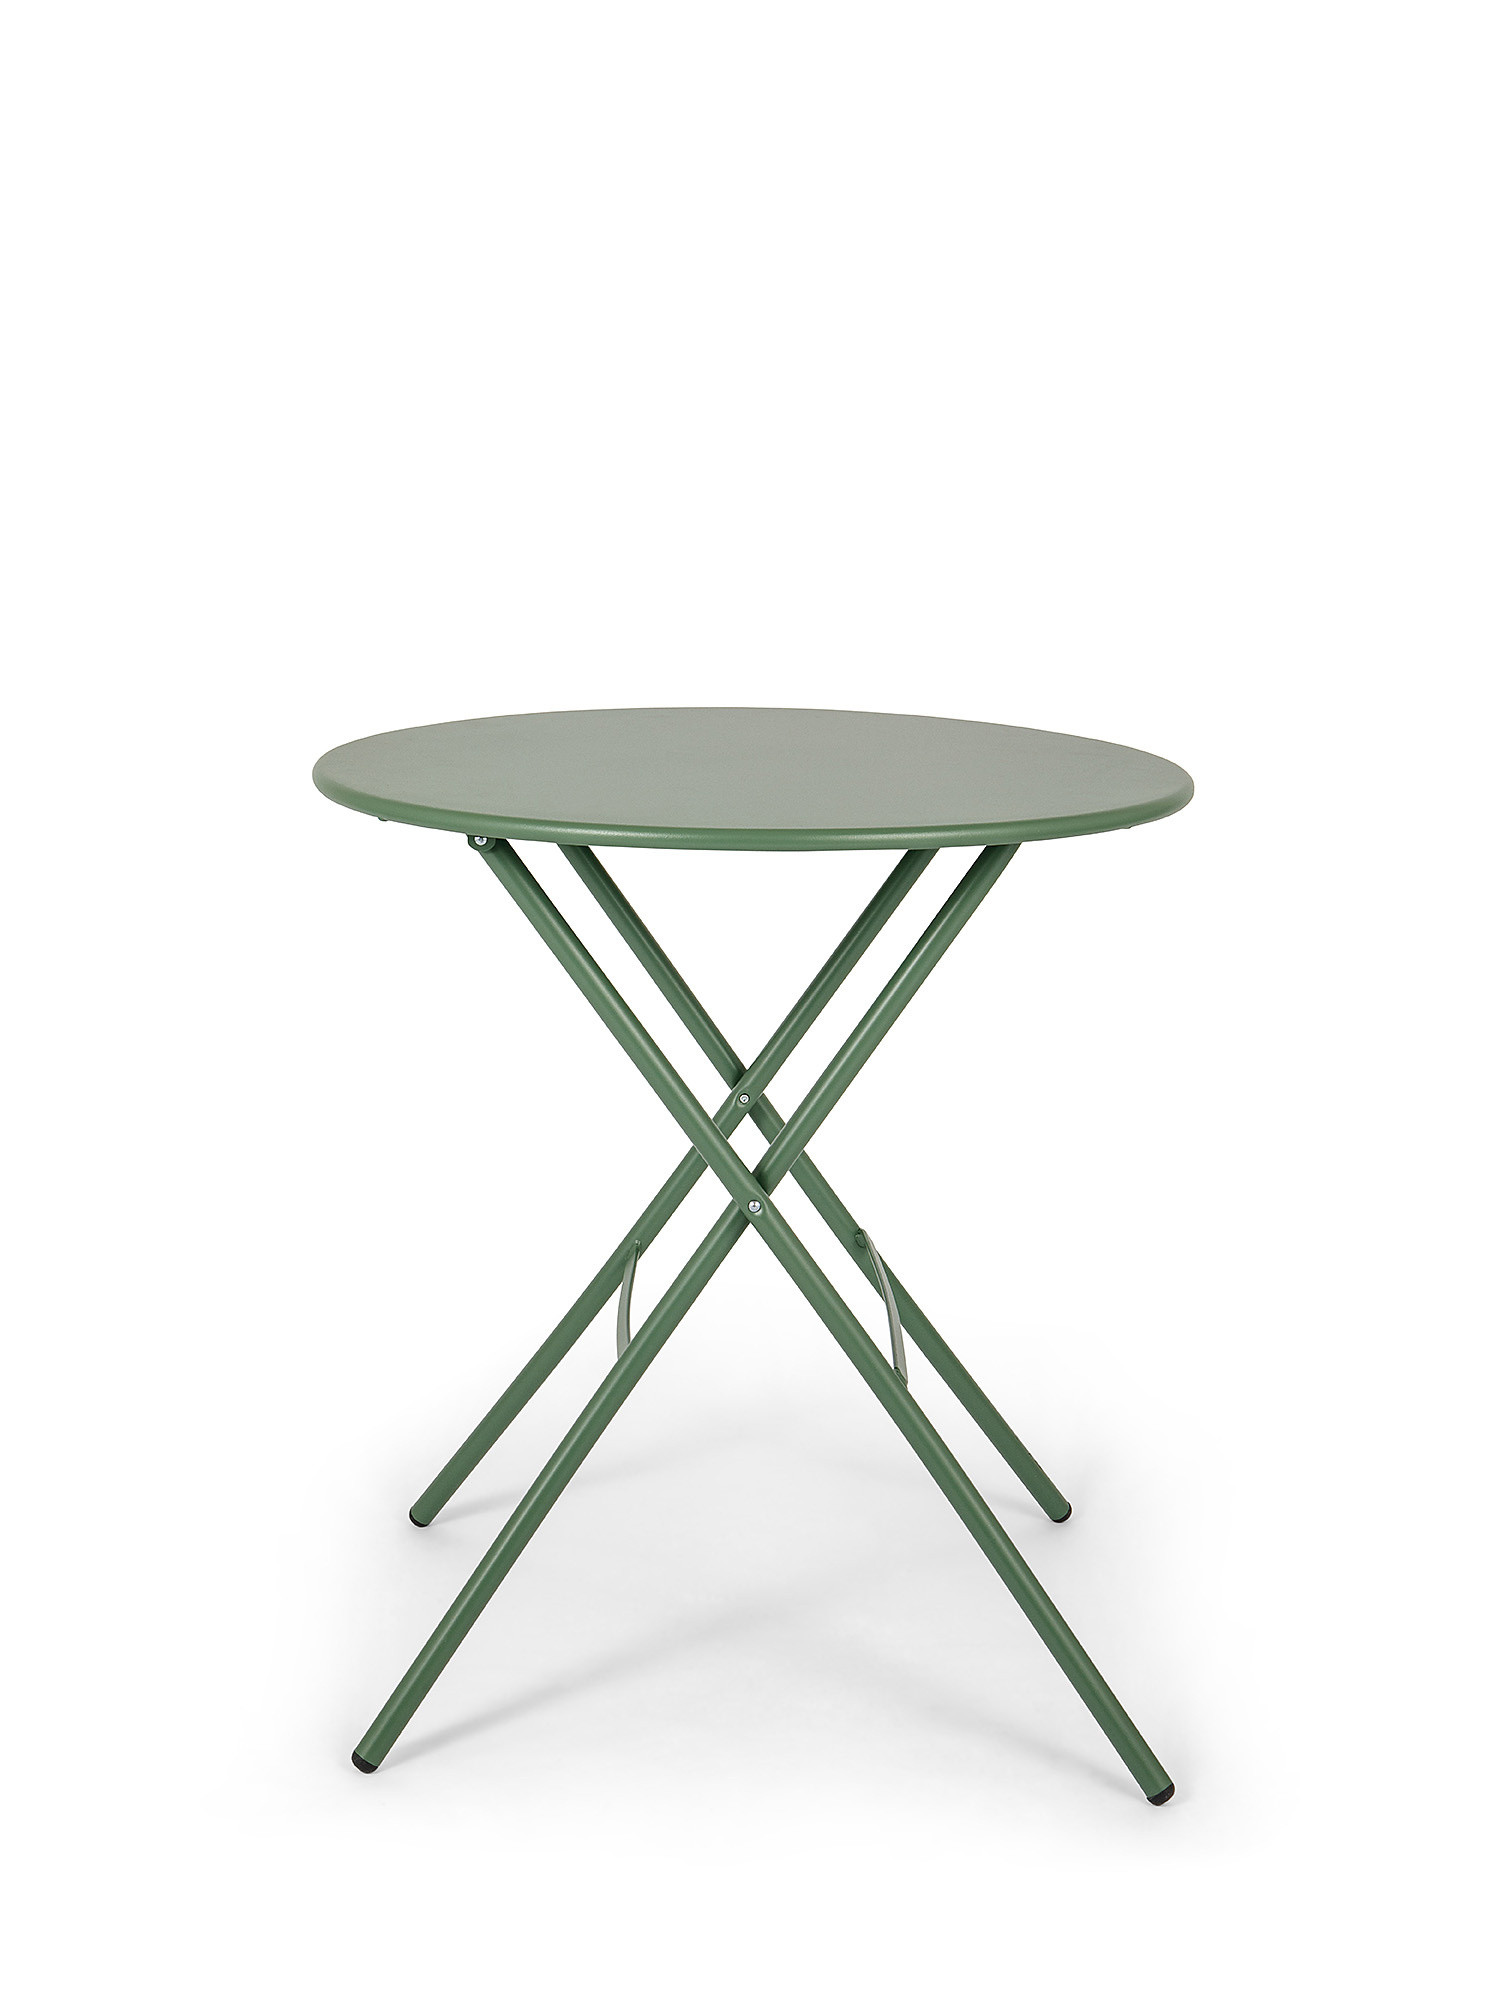 Fiam - Sirio folding steel outdoor table, Sage Green, large image number 0